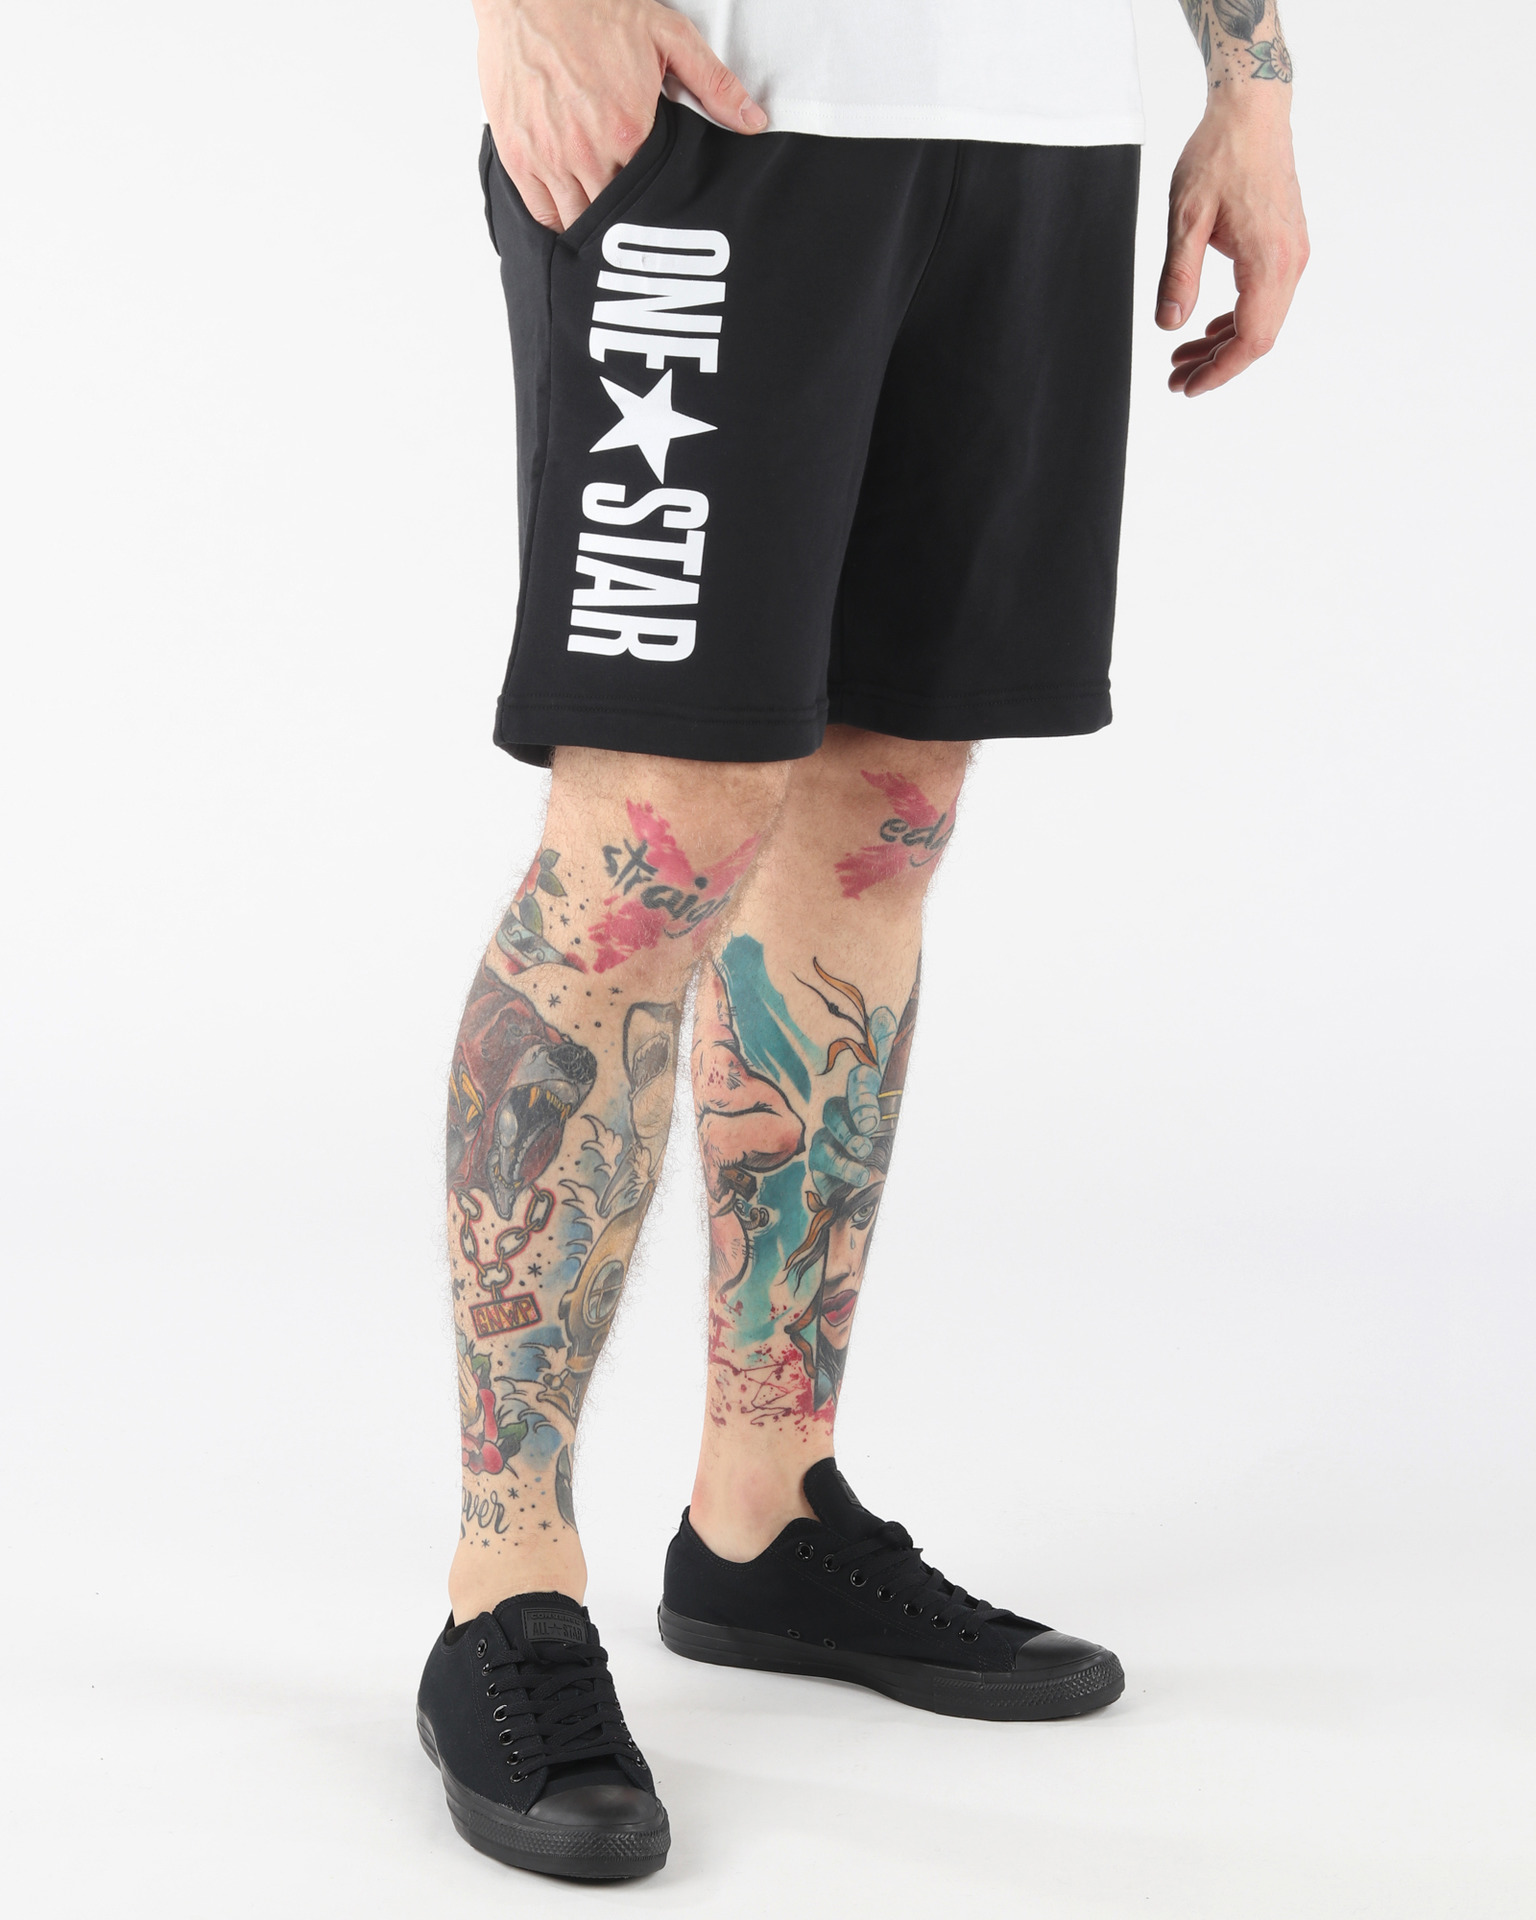 Titolo | Shop Space Jam x Converse Shorts - A New Legacy here at Titolo